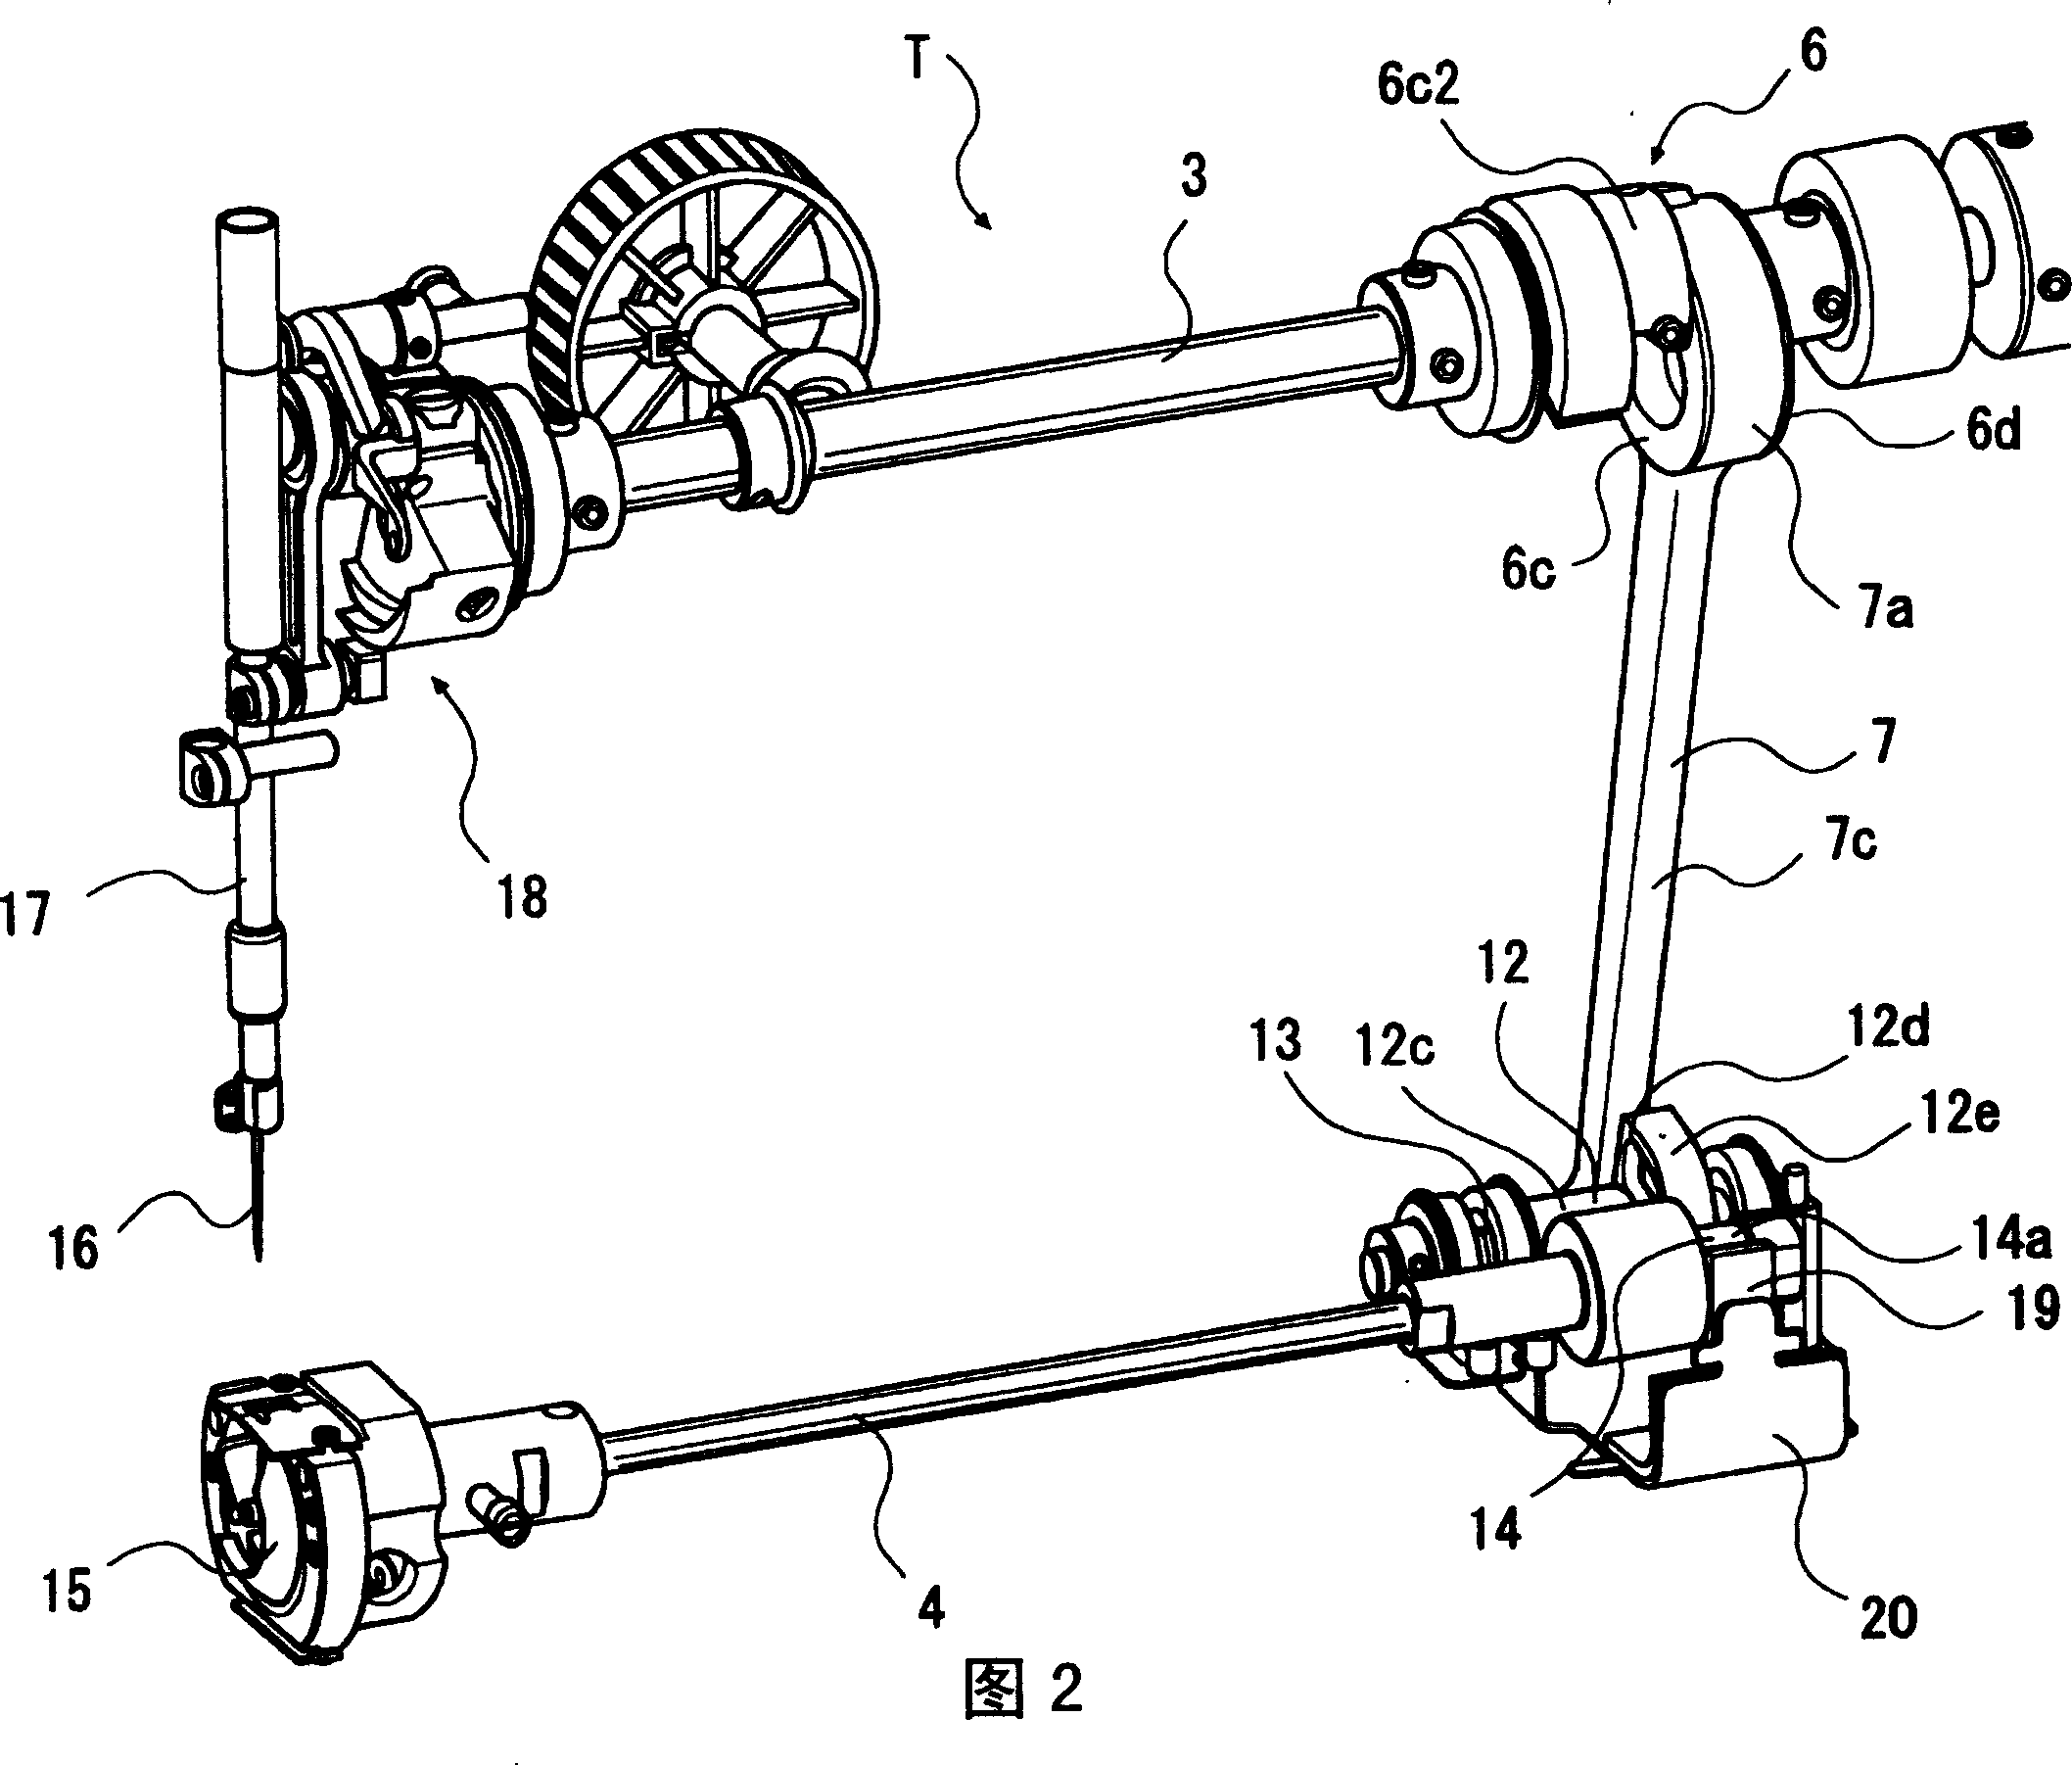 Power transmission mechanism of sewing machine